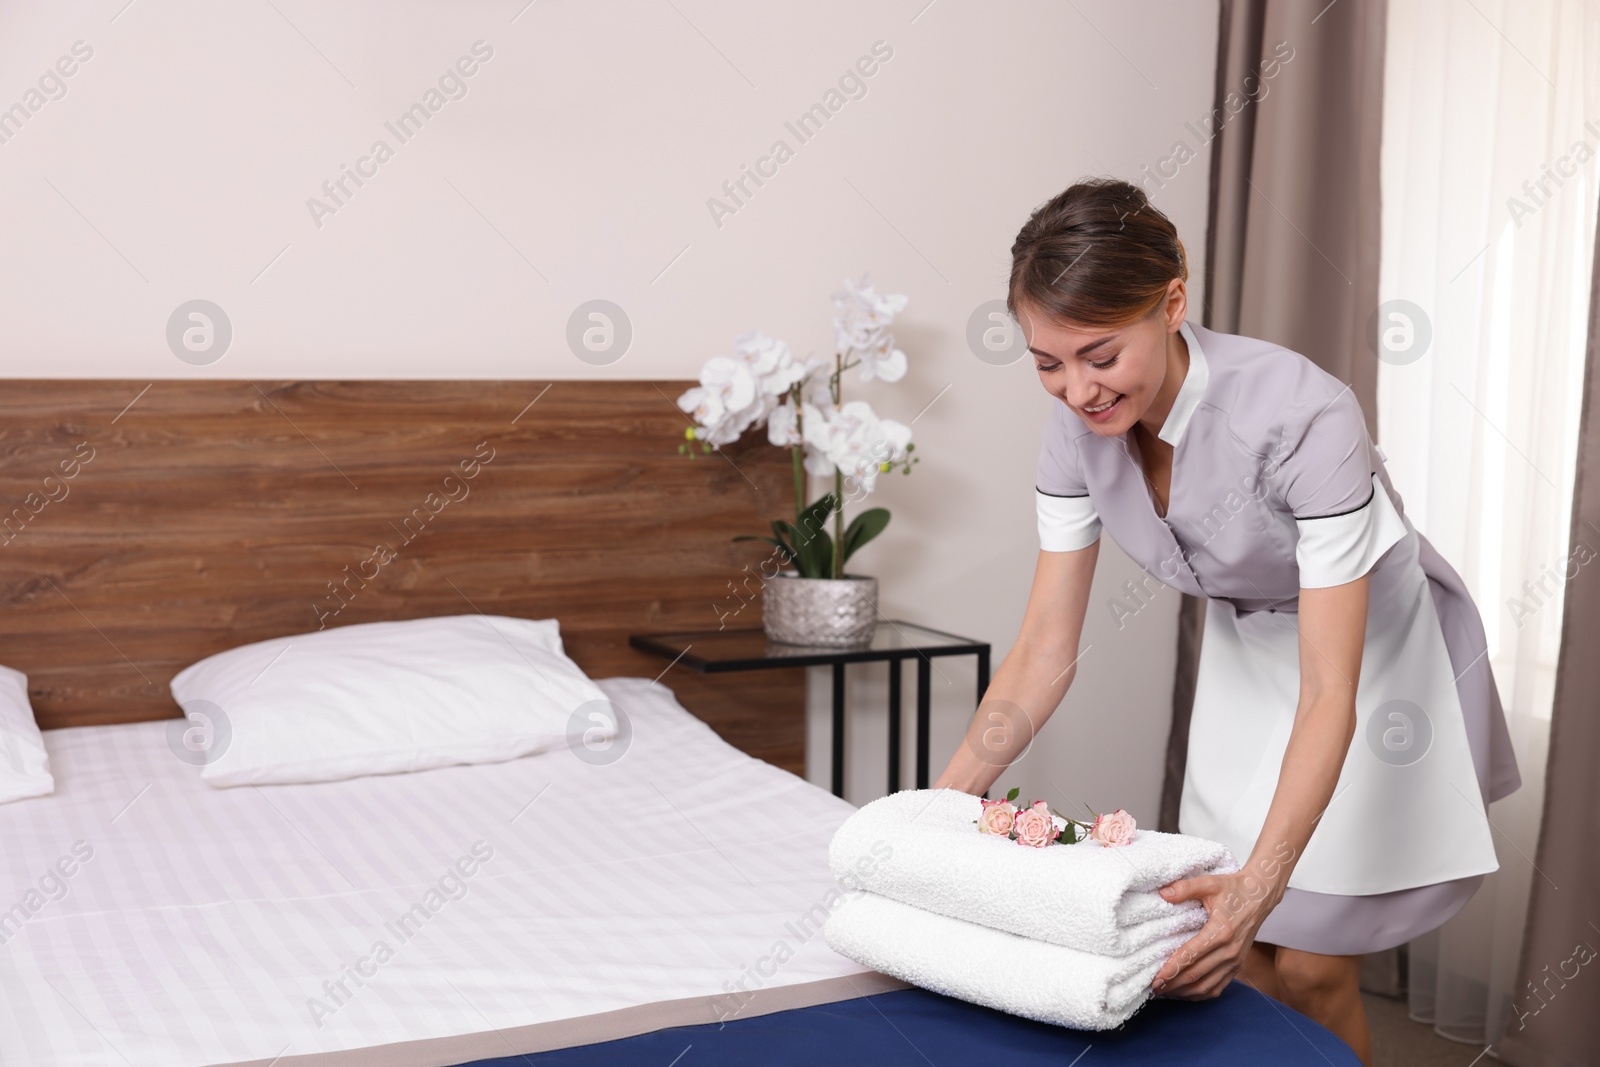 Photo of Beautiful chambermaid putting fresh towels on bed in hotel room